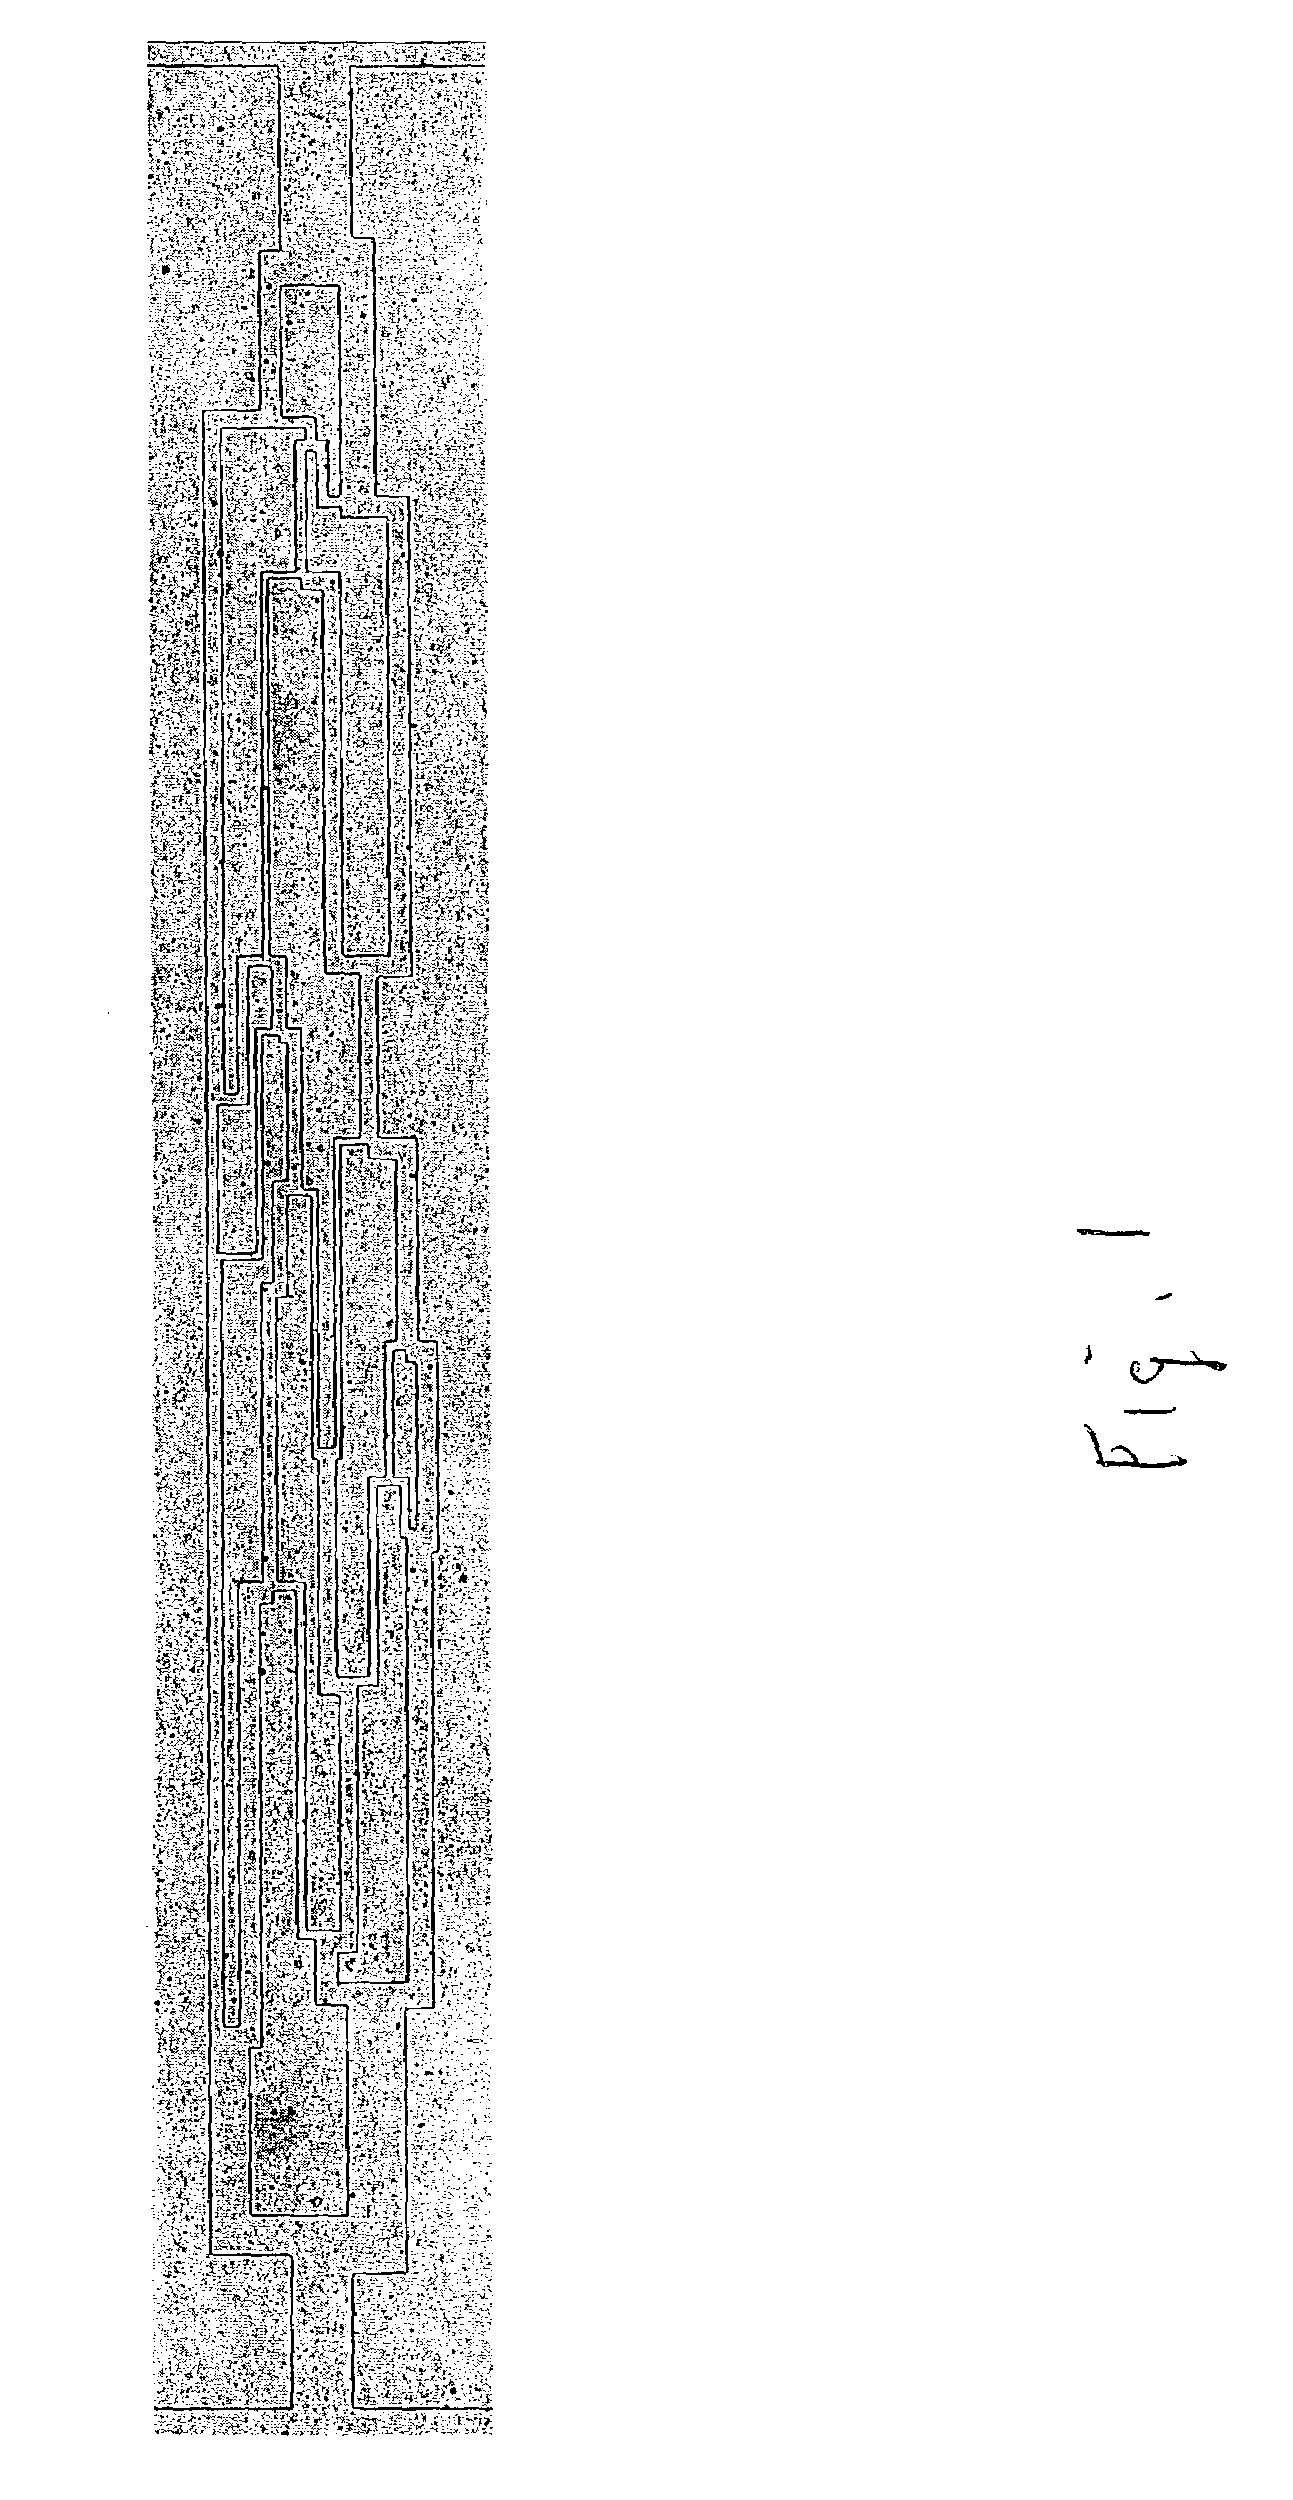 Microvascular network device